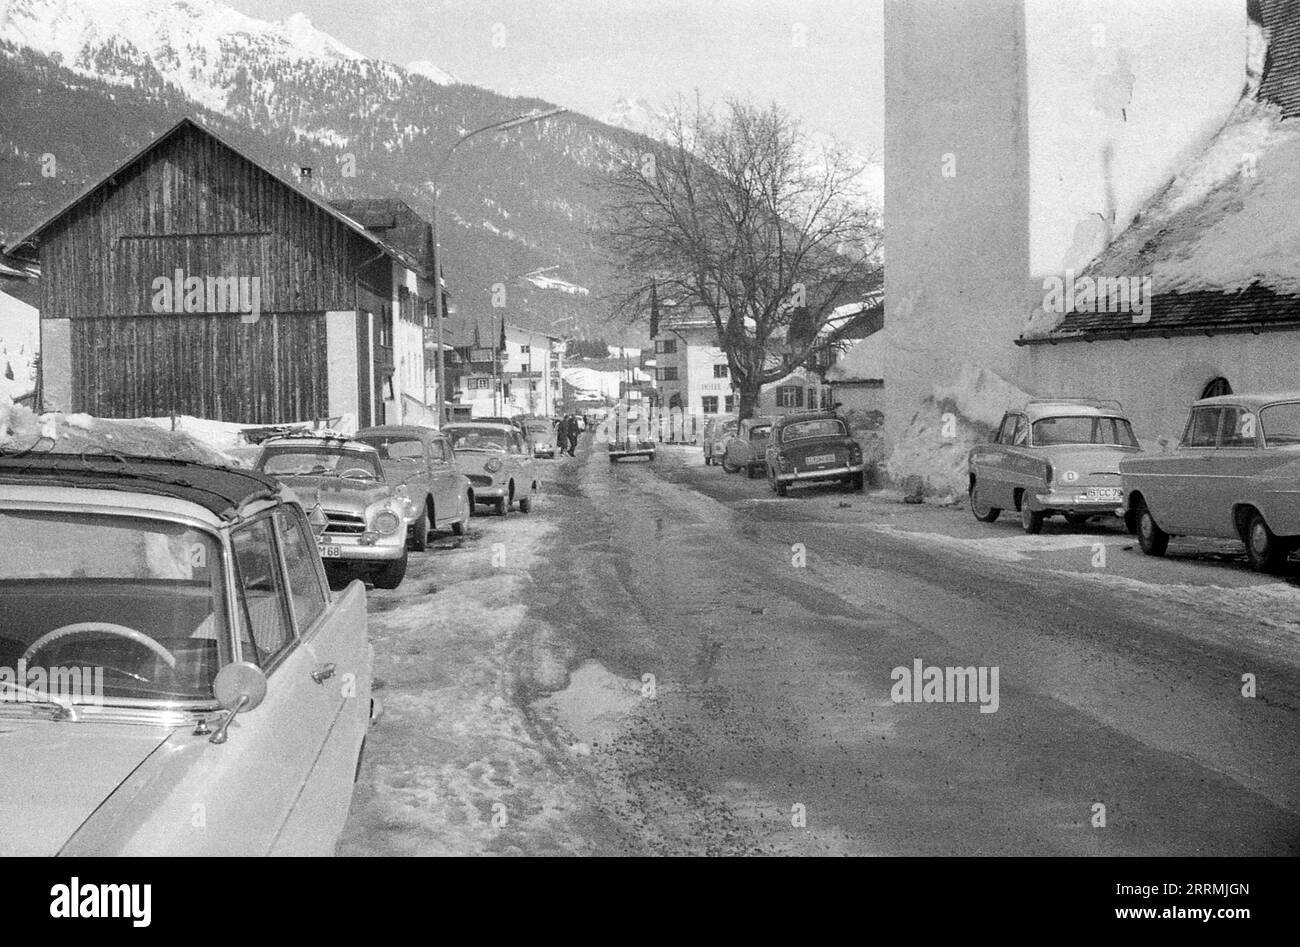 Tyrol, Austria. c.1960 – A view of Dorfstraße in the village of St Anton am Arlberg. On the right is St. Anthony of Padua church. Cars are parked along both sides of the road, which is in a slushy condition. Hotels and the snow-clad mountains of the Eastern Alps are visible in the distance. Stock Photo